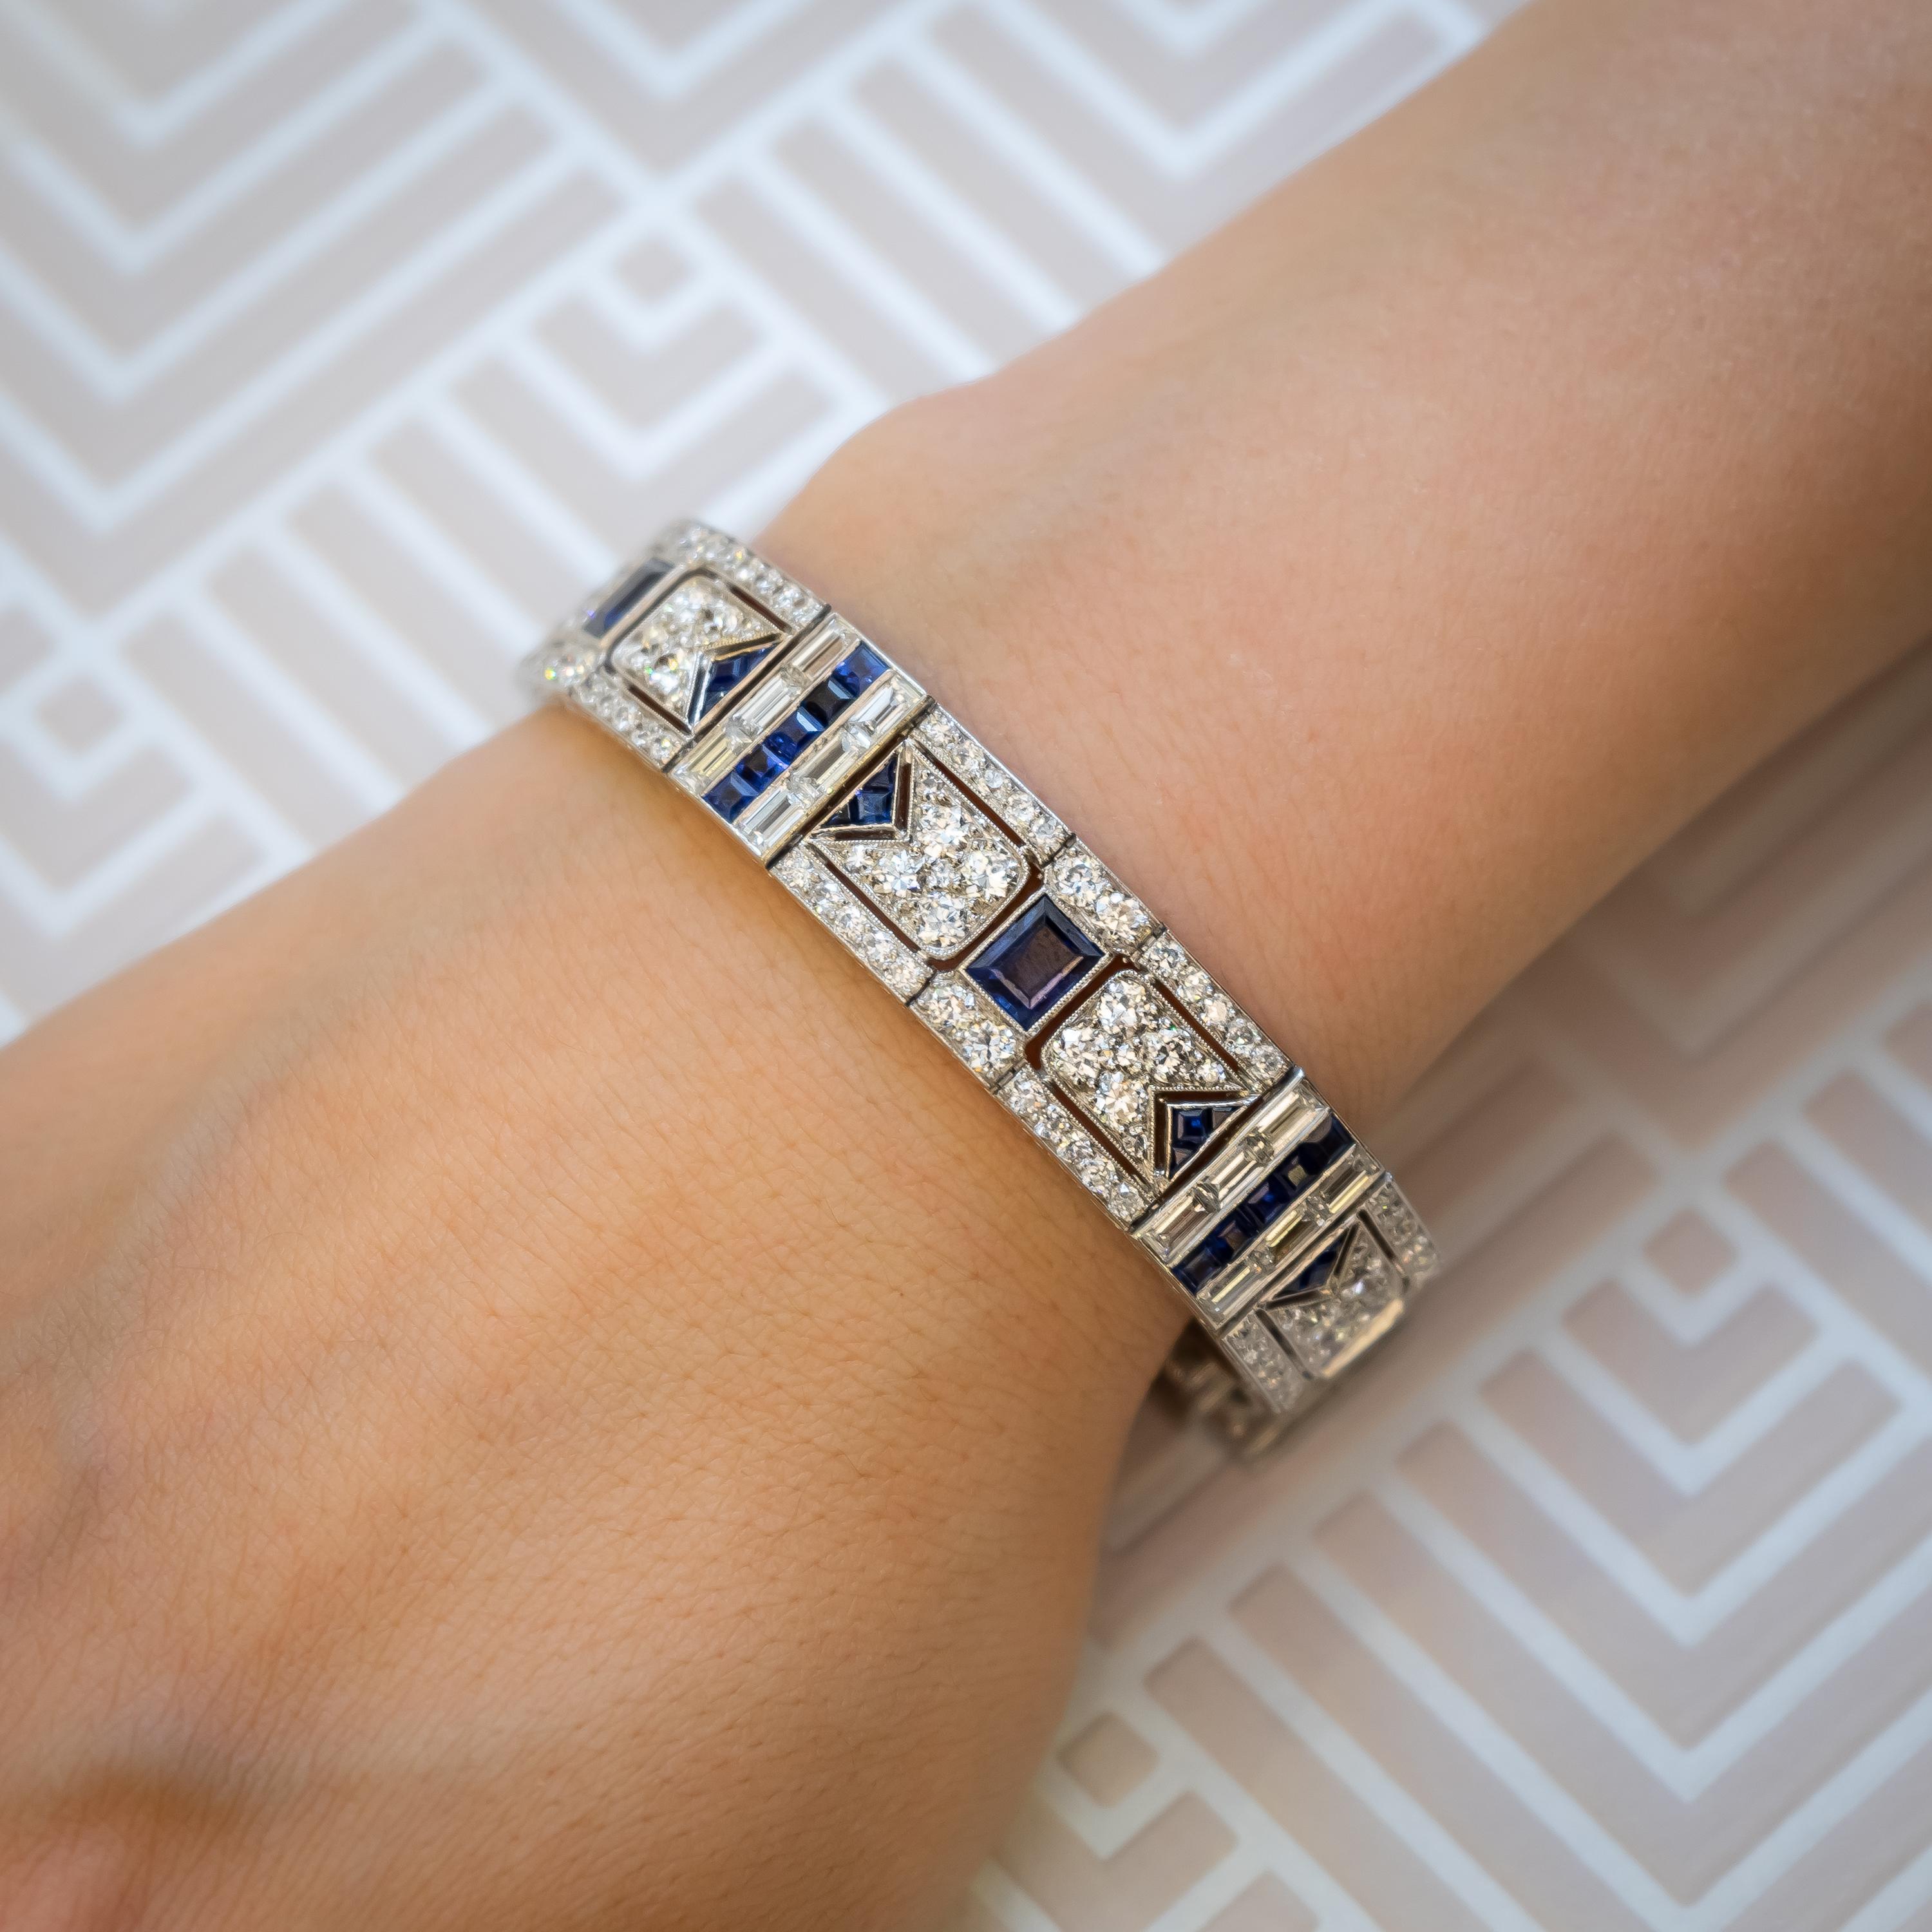 An Art Deco, sapphire and diamond bracelet, by Black Starr & Frost, of geometric design, set with Edwardian-cut and baguette-cut diamonds and calibré and faceted, rectangle cut sapphires. Composed of ten square and ten rectangular links, set with